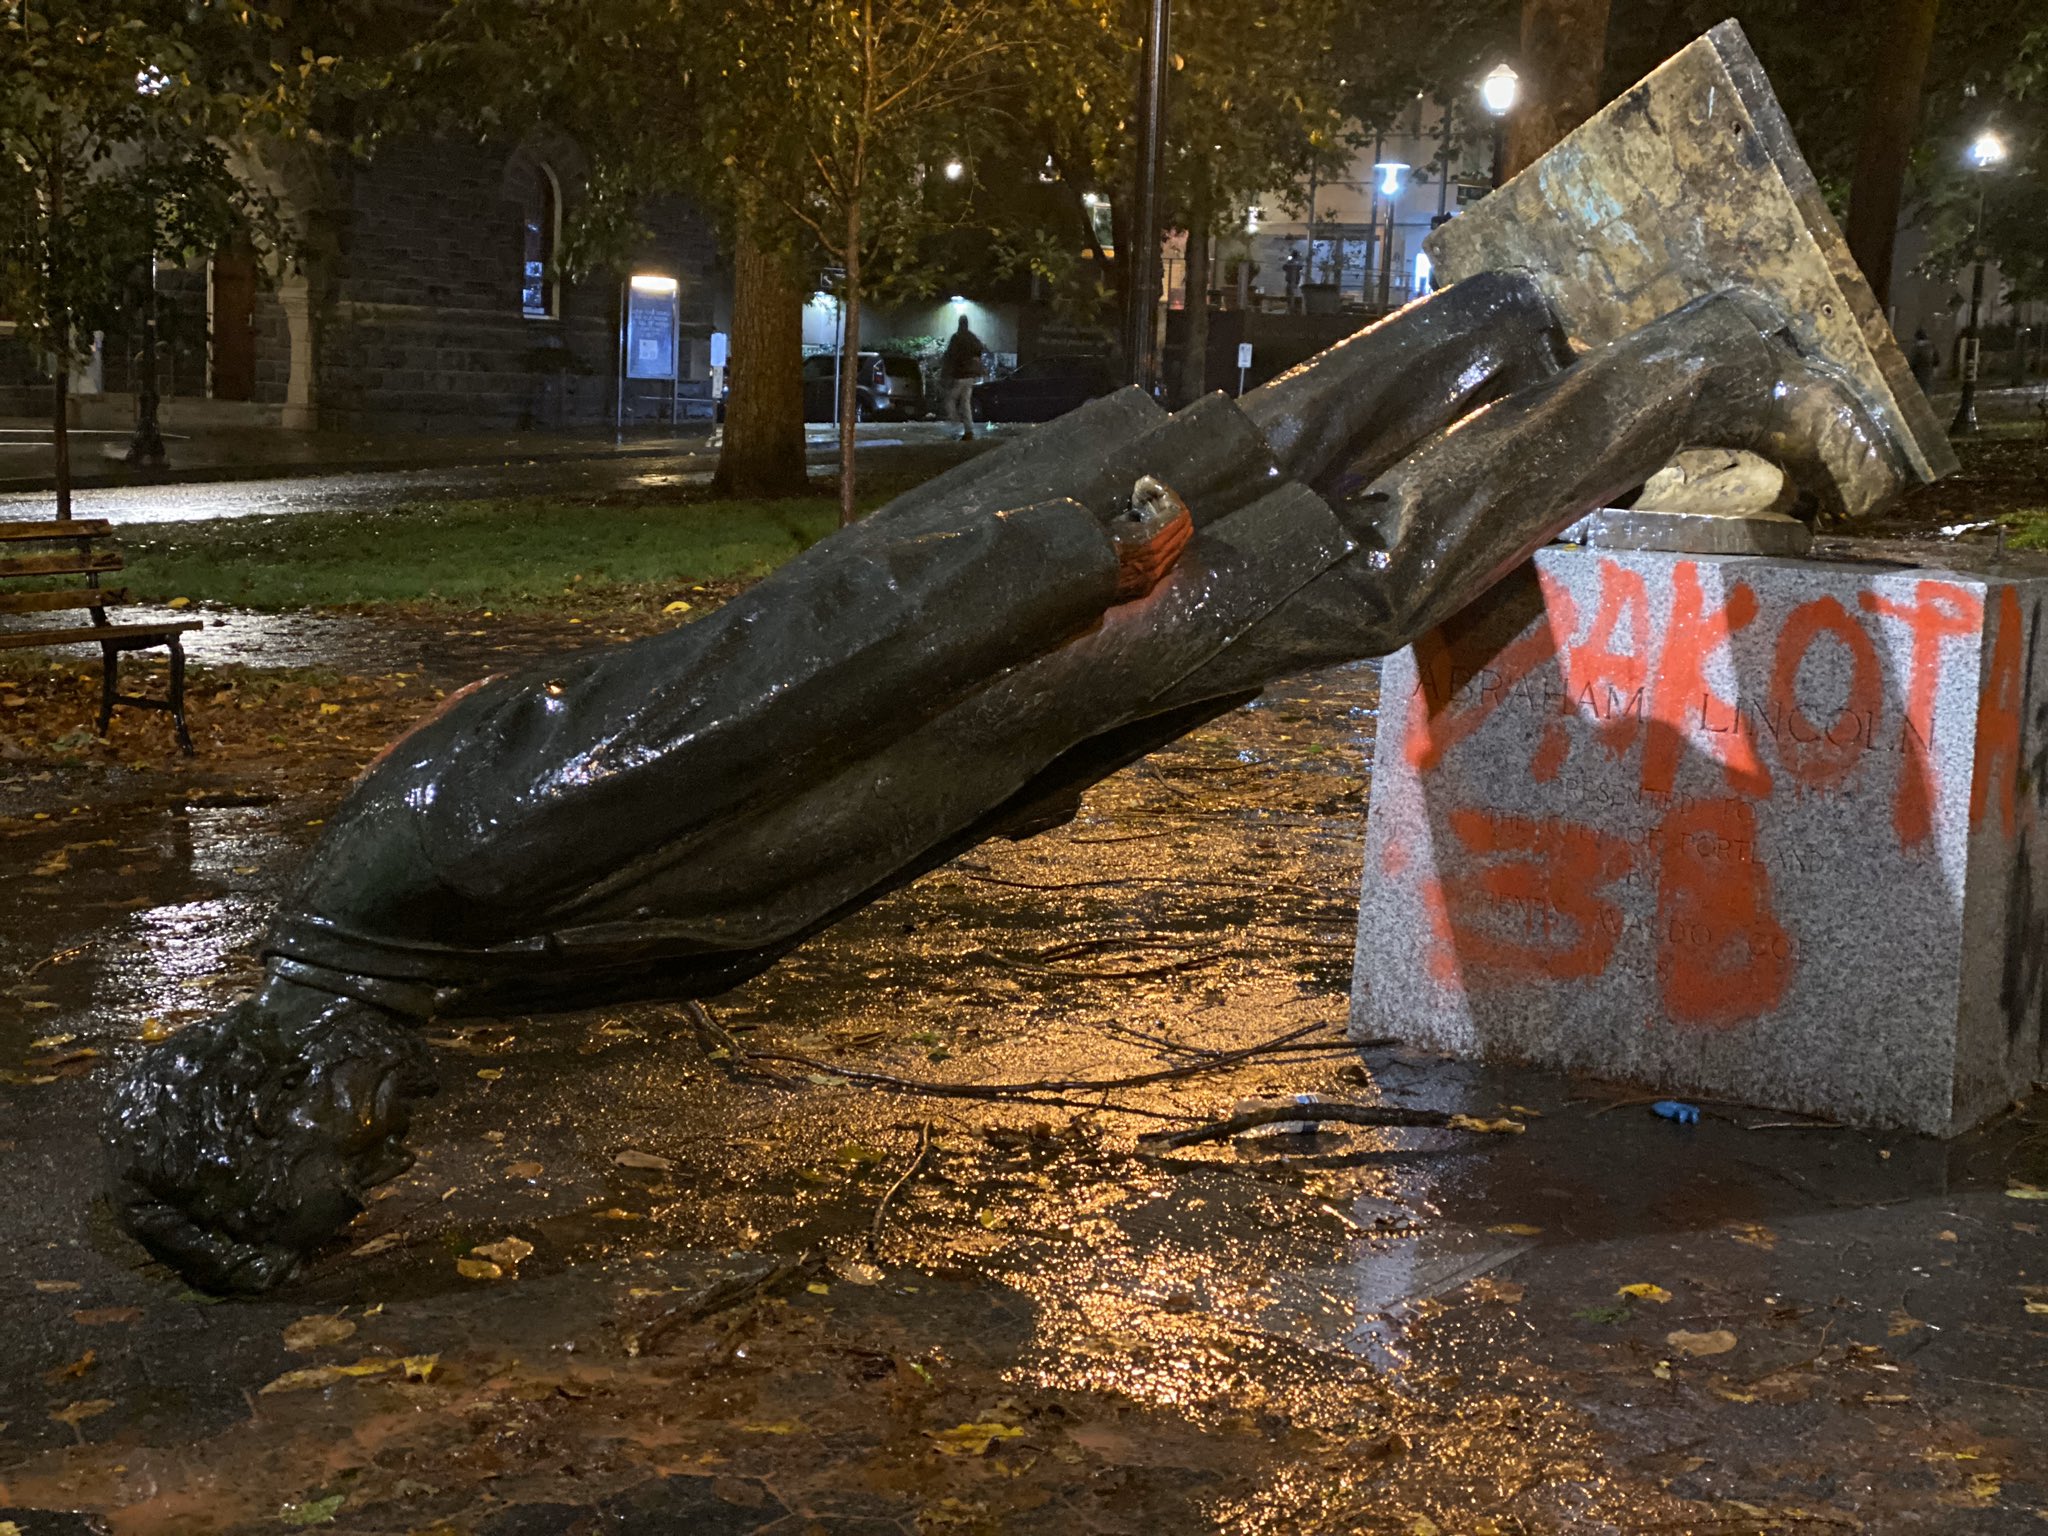 Statue of Abraham Lincoln in Portland, Oregon, toppled during the Indigenous Peoples Day of Rage on October 11, 2020. George Fite Waters, Abraham Lincoln, 1927, bronze, 10 feet high, photo © Sergio Olmos